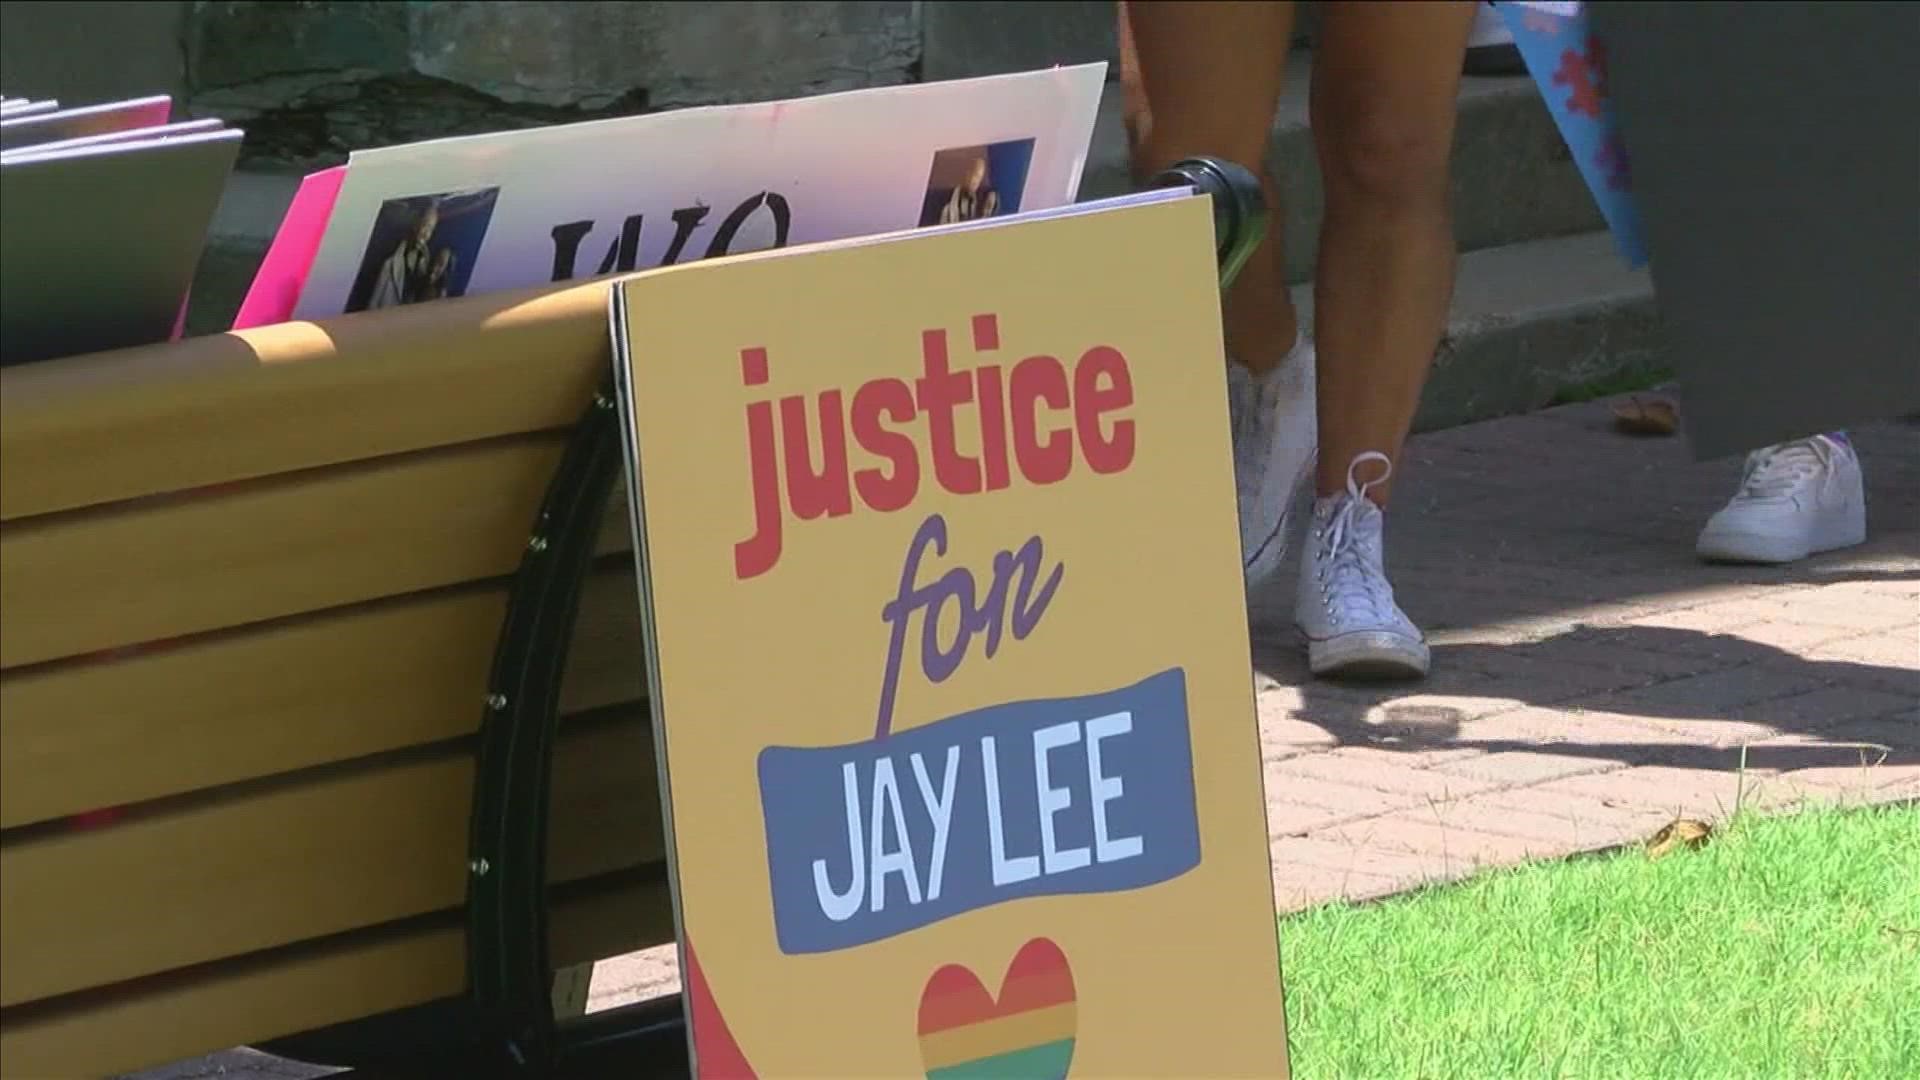 Jimmie 'Jay' Lee supporters rally as accused killer goes to court |  